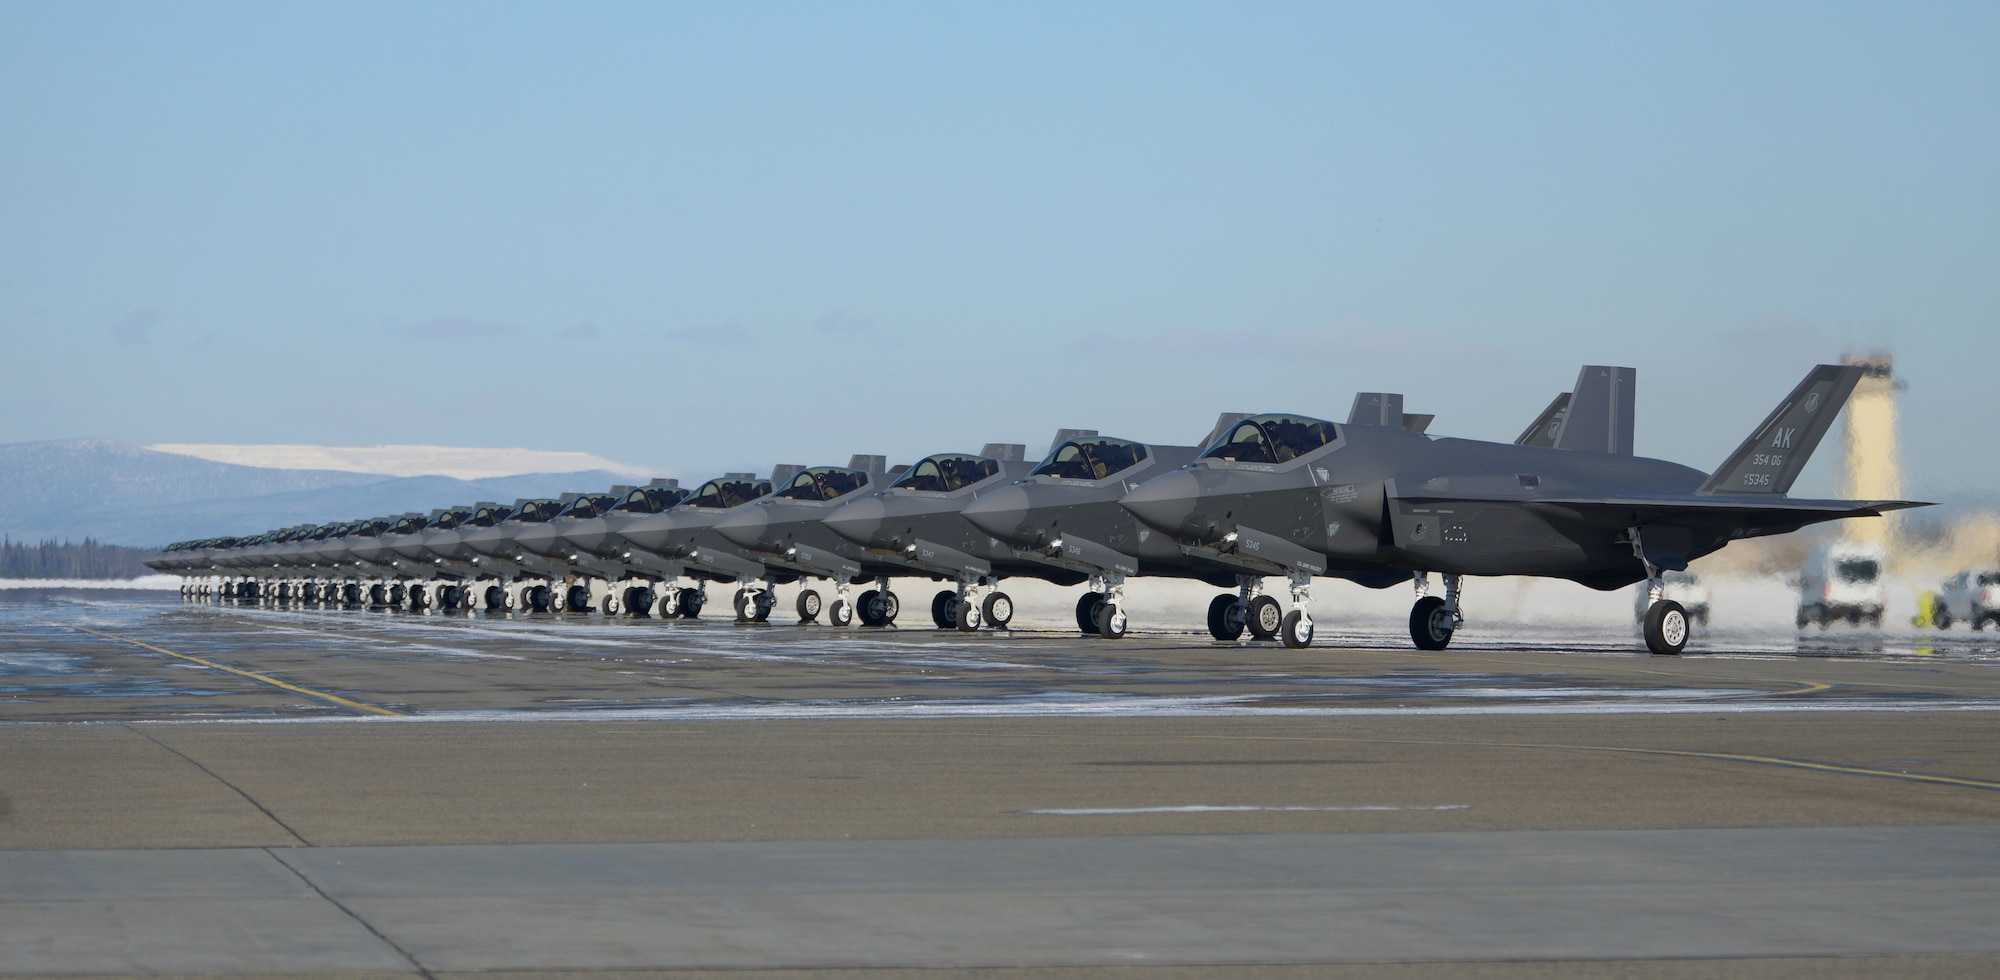 Twenty-five F-35A Lightning IIs assigned to the 354th Fighter Wing prepare to launch during Arctic Gold 21-2 April 7, 2021, on Eielson Air Force Base, Alaska. This exercise will evaluate the 354th Fighter Wing’s ability to effectively generate F-35A Lightning II aircraft and deploy personnel and cargo from across the wing. (U.S. Air Force photo by Senior Airman Beaux Hebert)